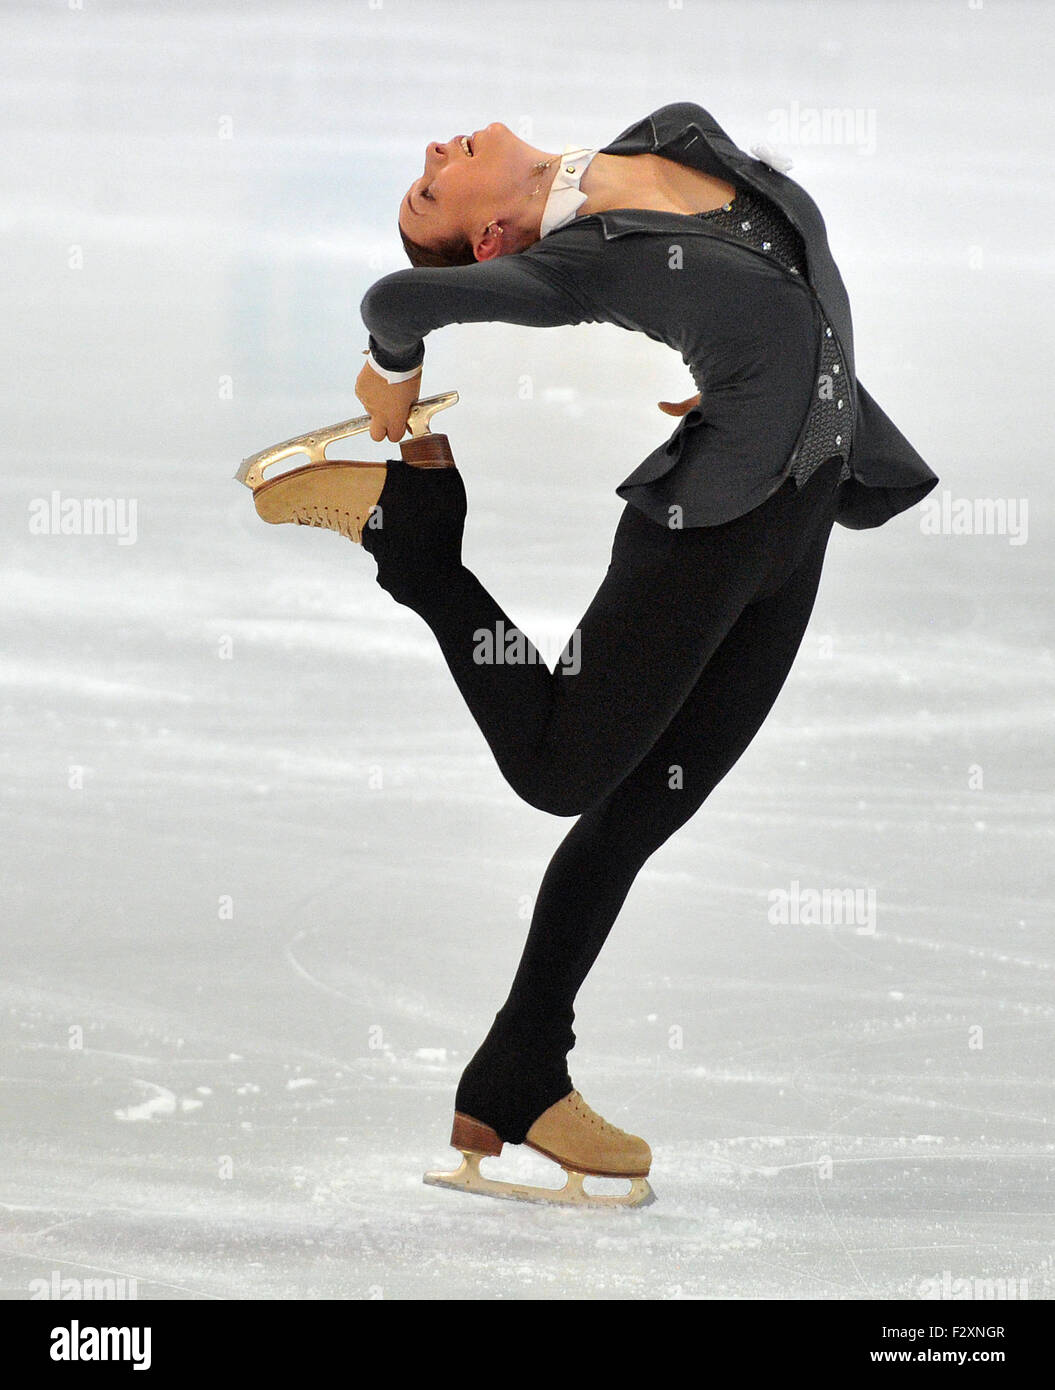 Russian figure skater Alena Leonova in action during her short program at the Nebelhorn Trophy figure skating competition in Oberstdorf, Germany, 25 September 2015. Photo: STEFAN PUCHNER/dpa Stock Photo